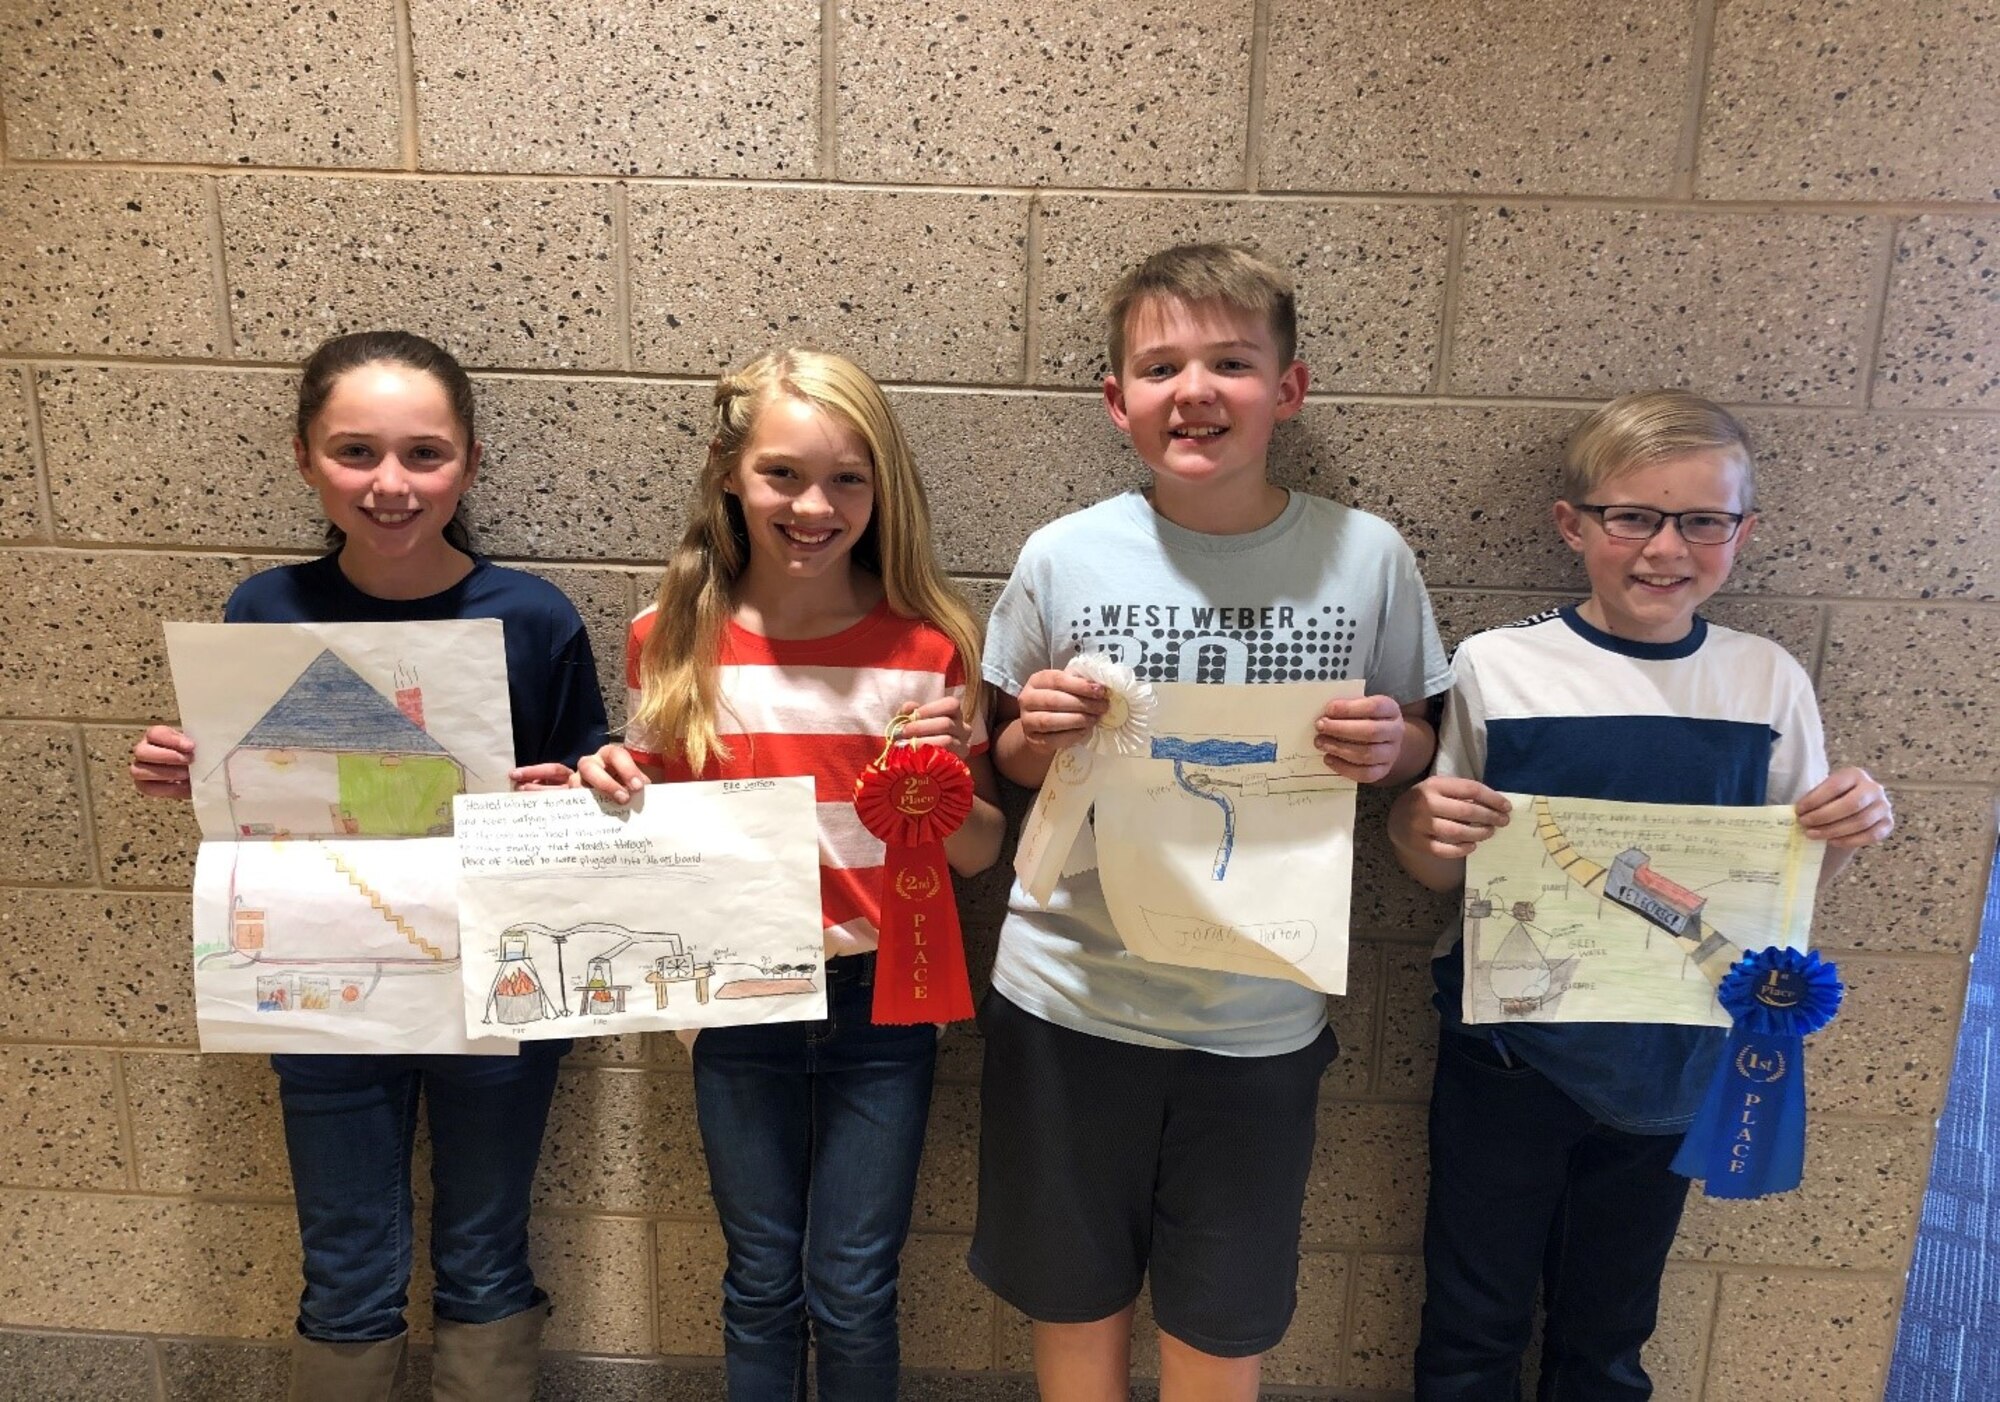 Four 6th graders from est Weber Elementary hold up their winning Energy Action Month Art Contest drawings.